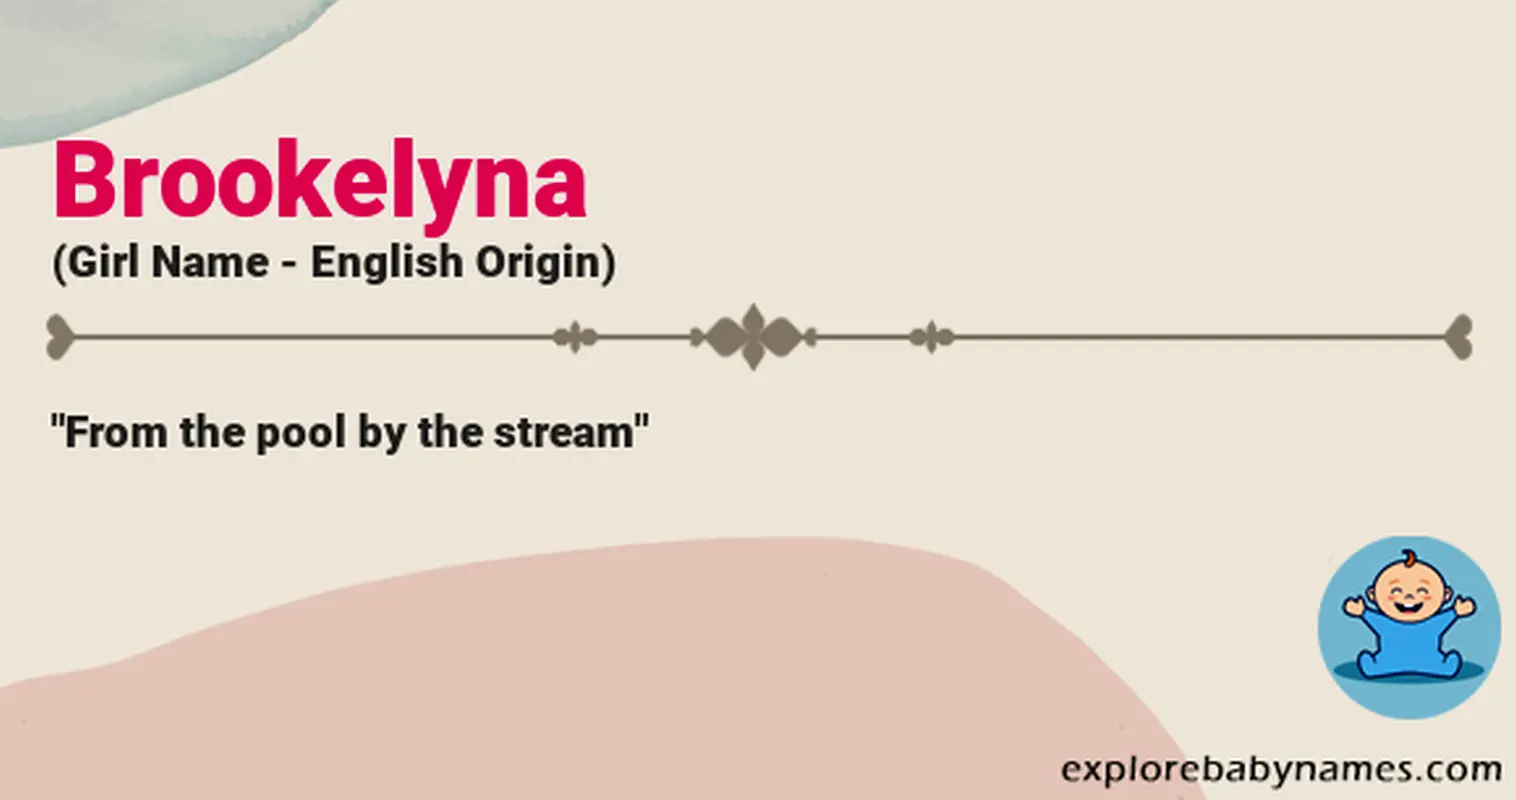 Meaning of Brookelyna